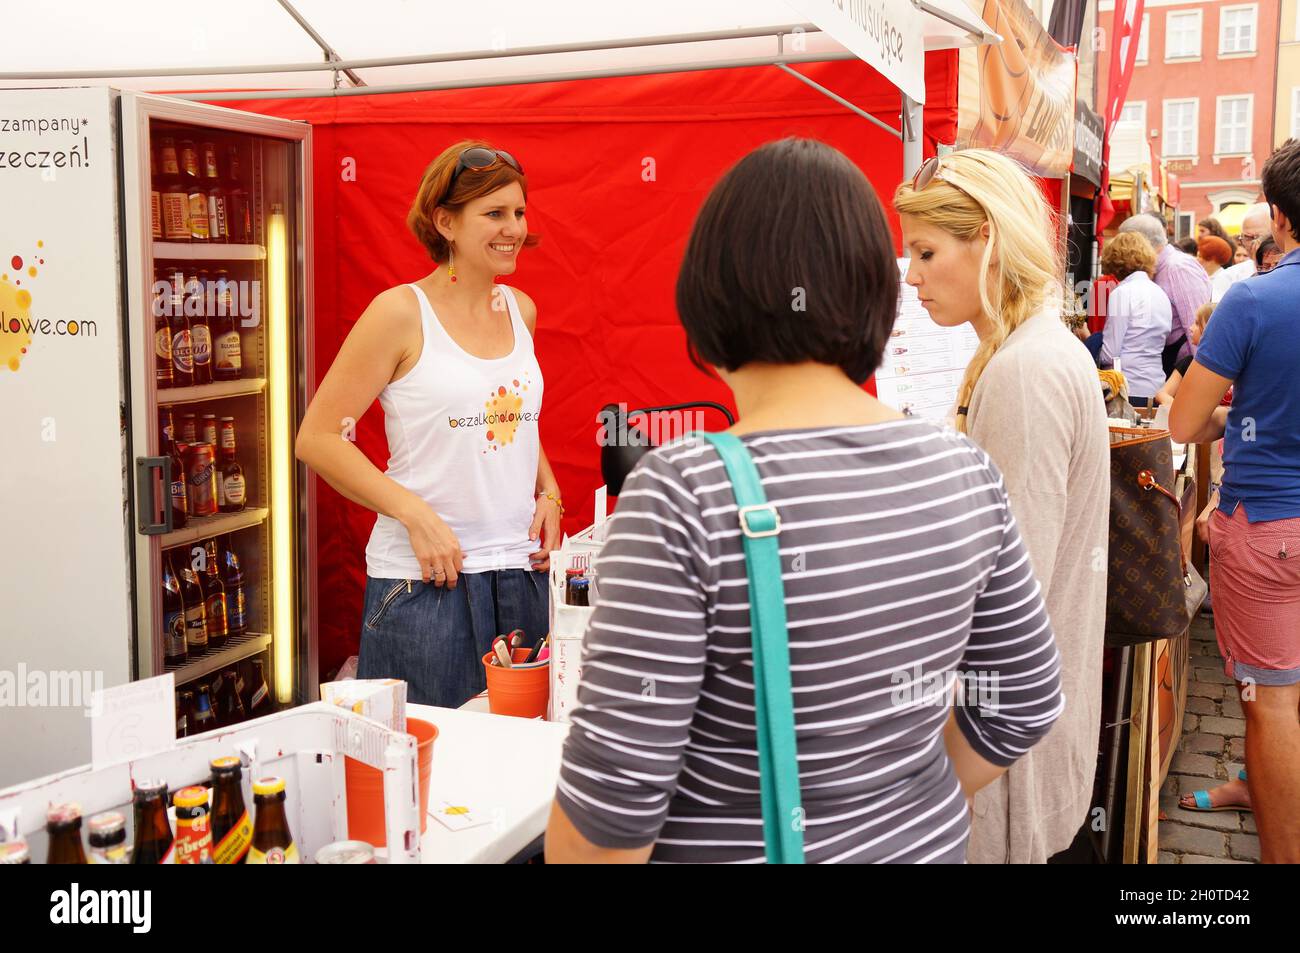 POZNAN, POLAND - Aug 15, 2013: A pregnant woman buying alcohol free beer during a food festival in the old city square Stock Photo